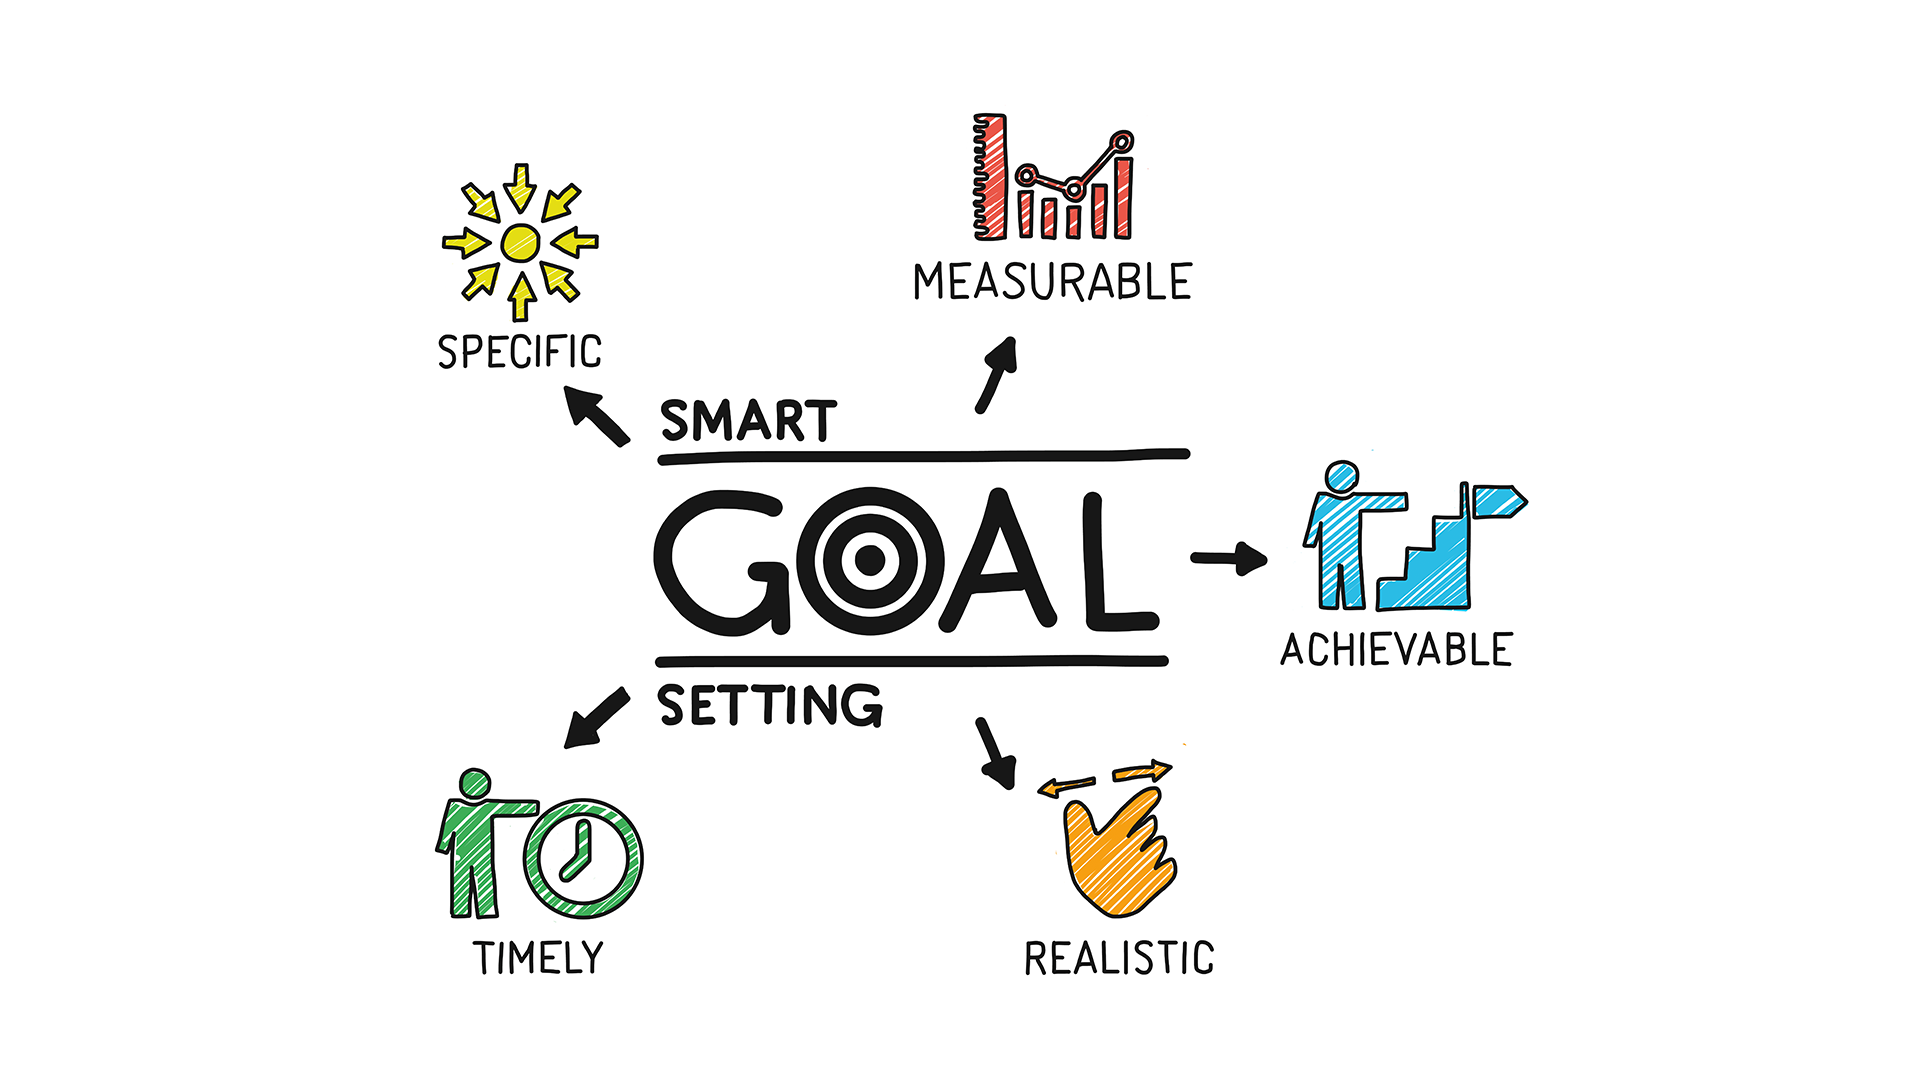 image showing a representation of SMART GOALS.